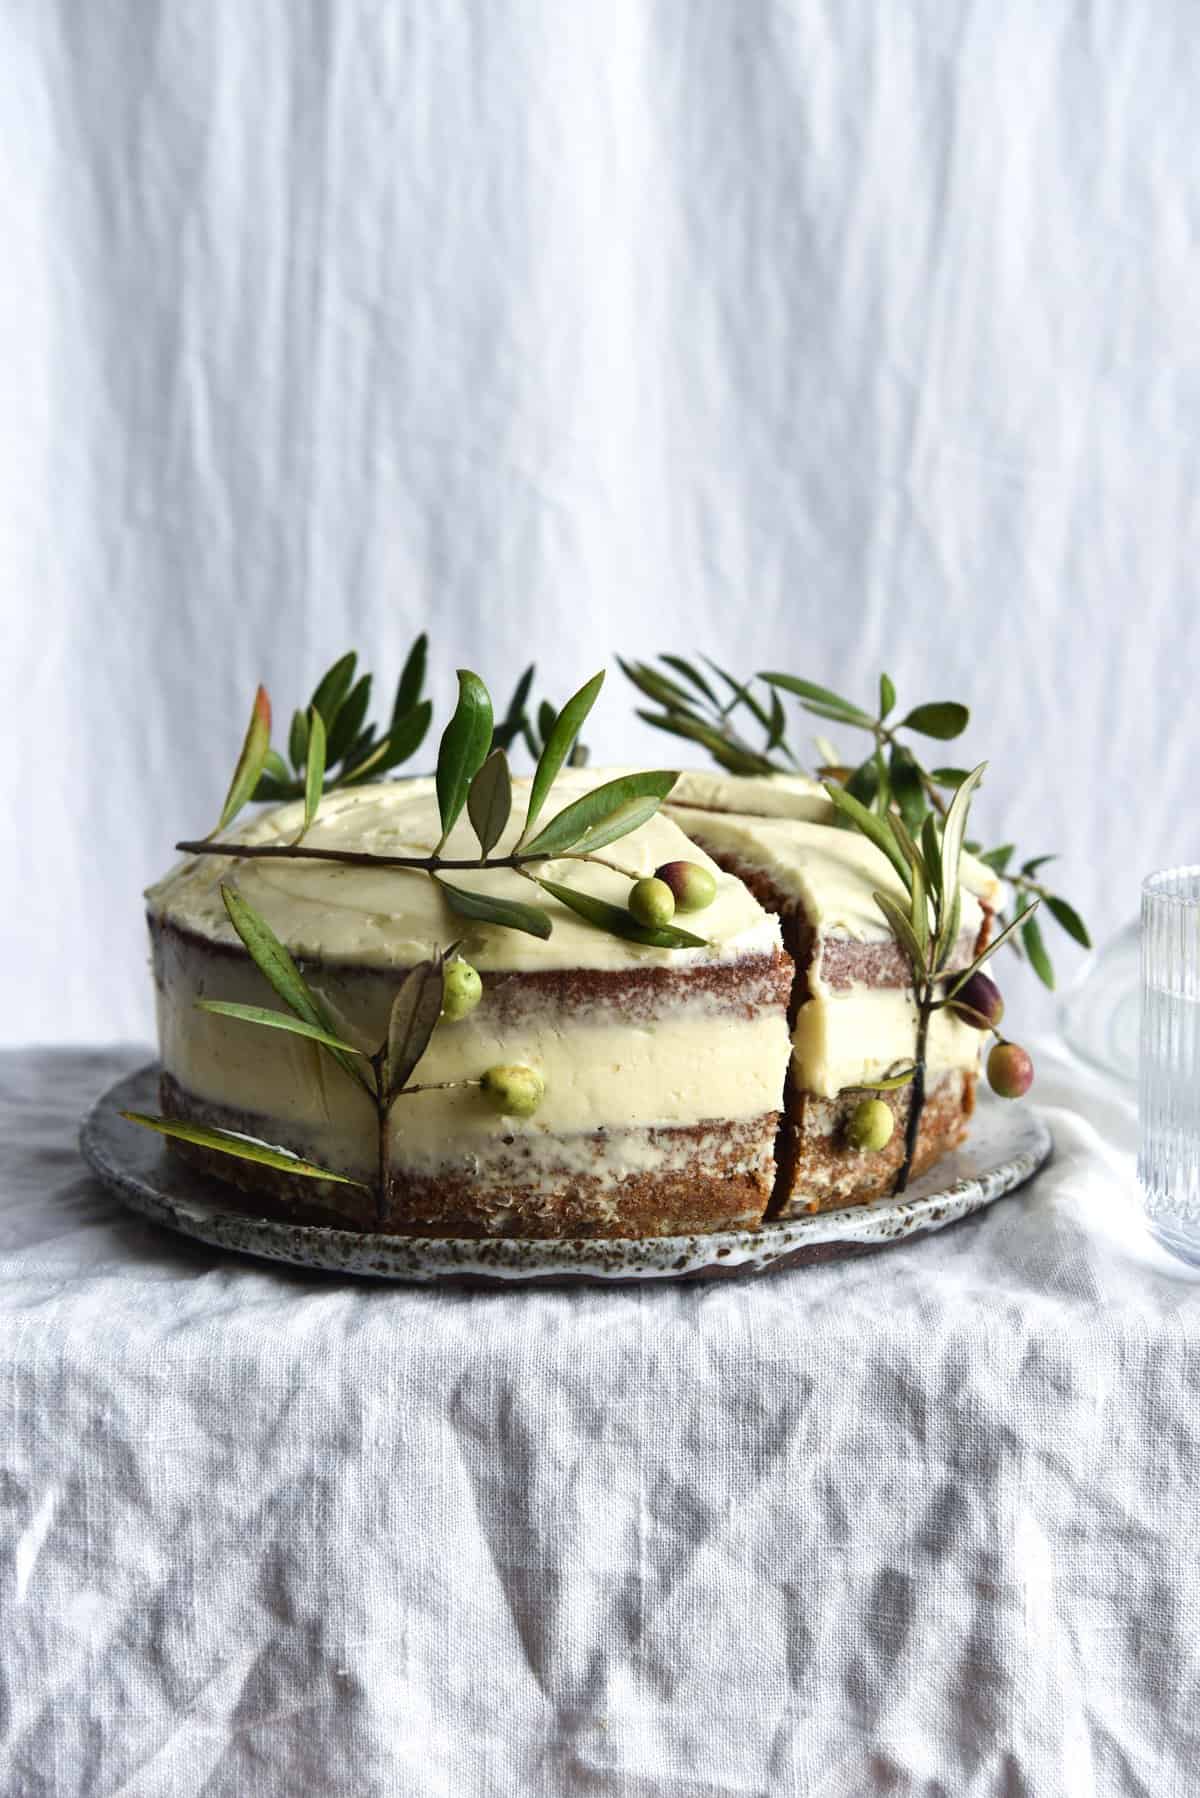 A side on view of a gluten free carrot cake. The cake is a layer cake, topped with naked cream cheese icing. The sides of the cake are decorated with olive branches. The cake sits atop a white speckled ceramic plate on a white linen backdrop